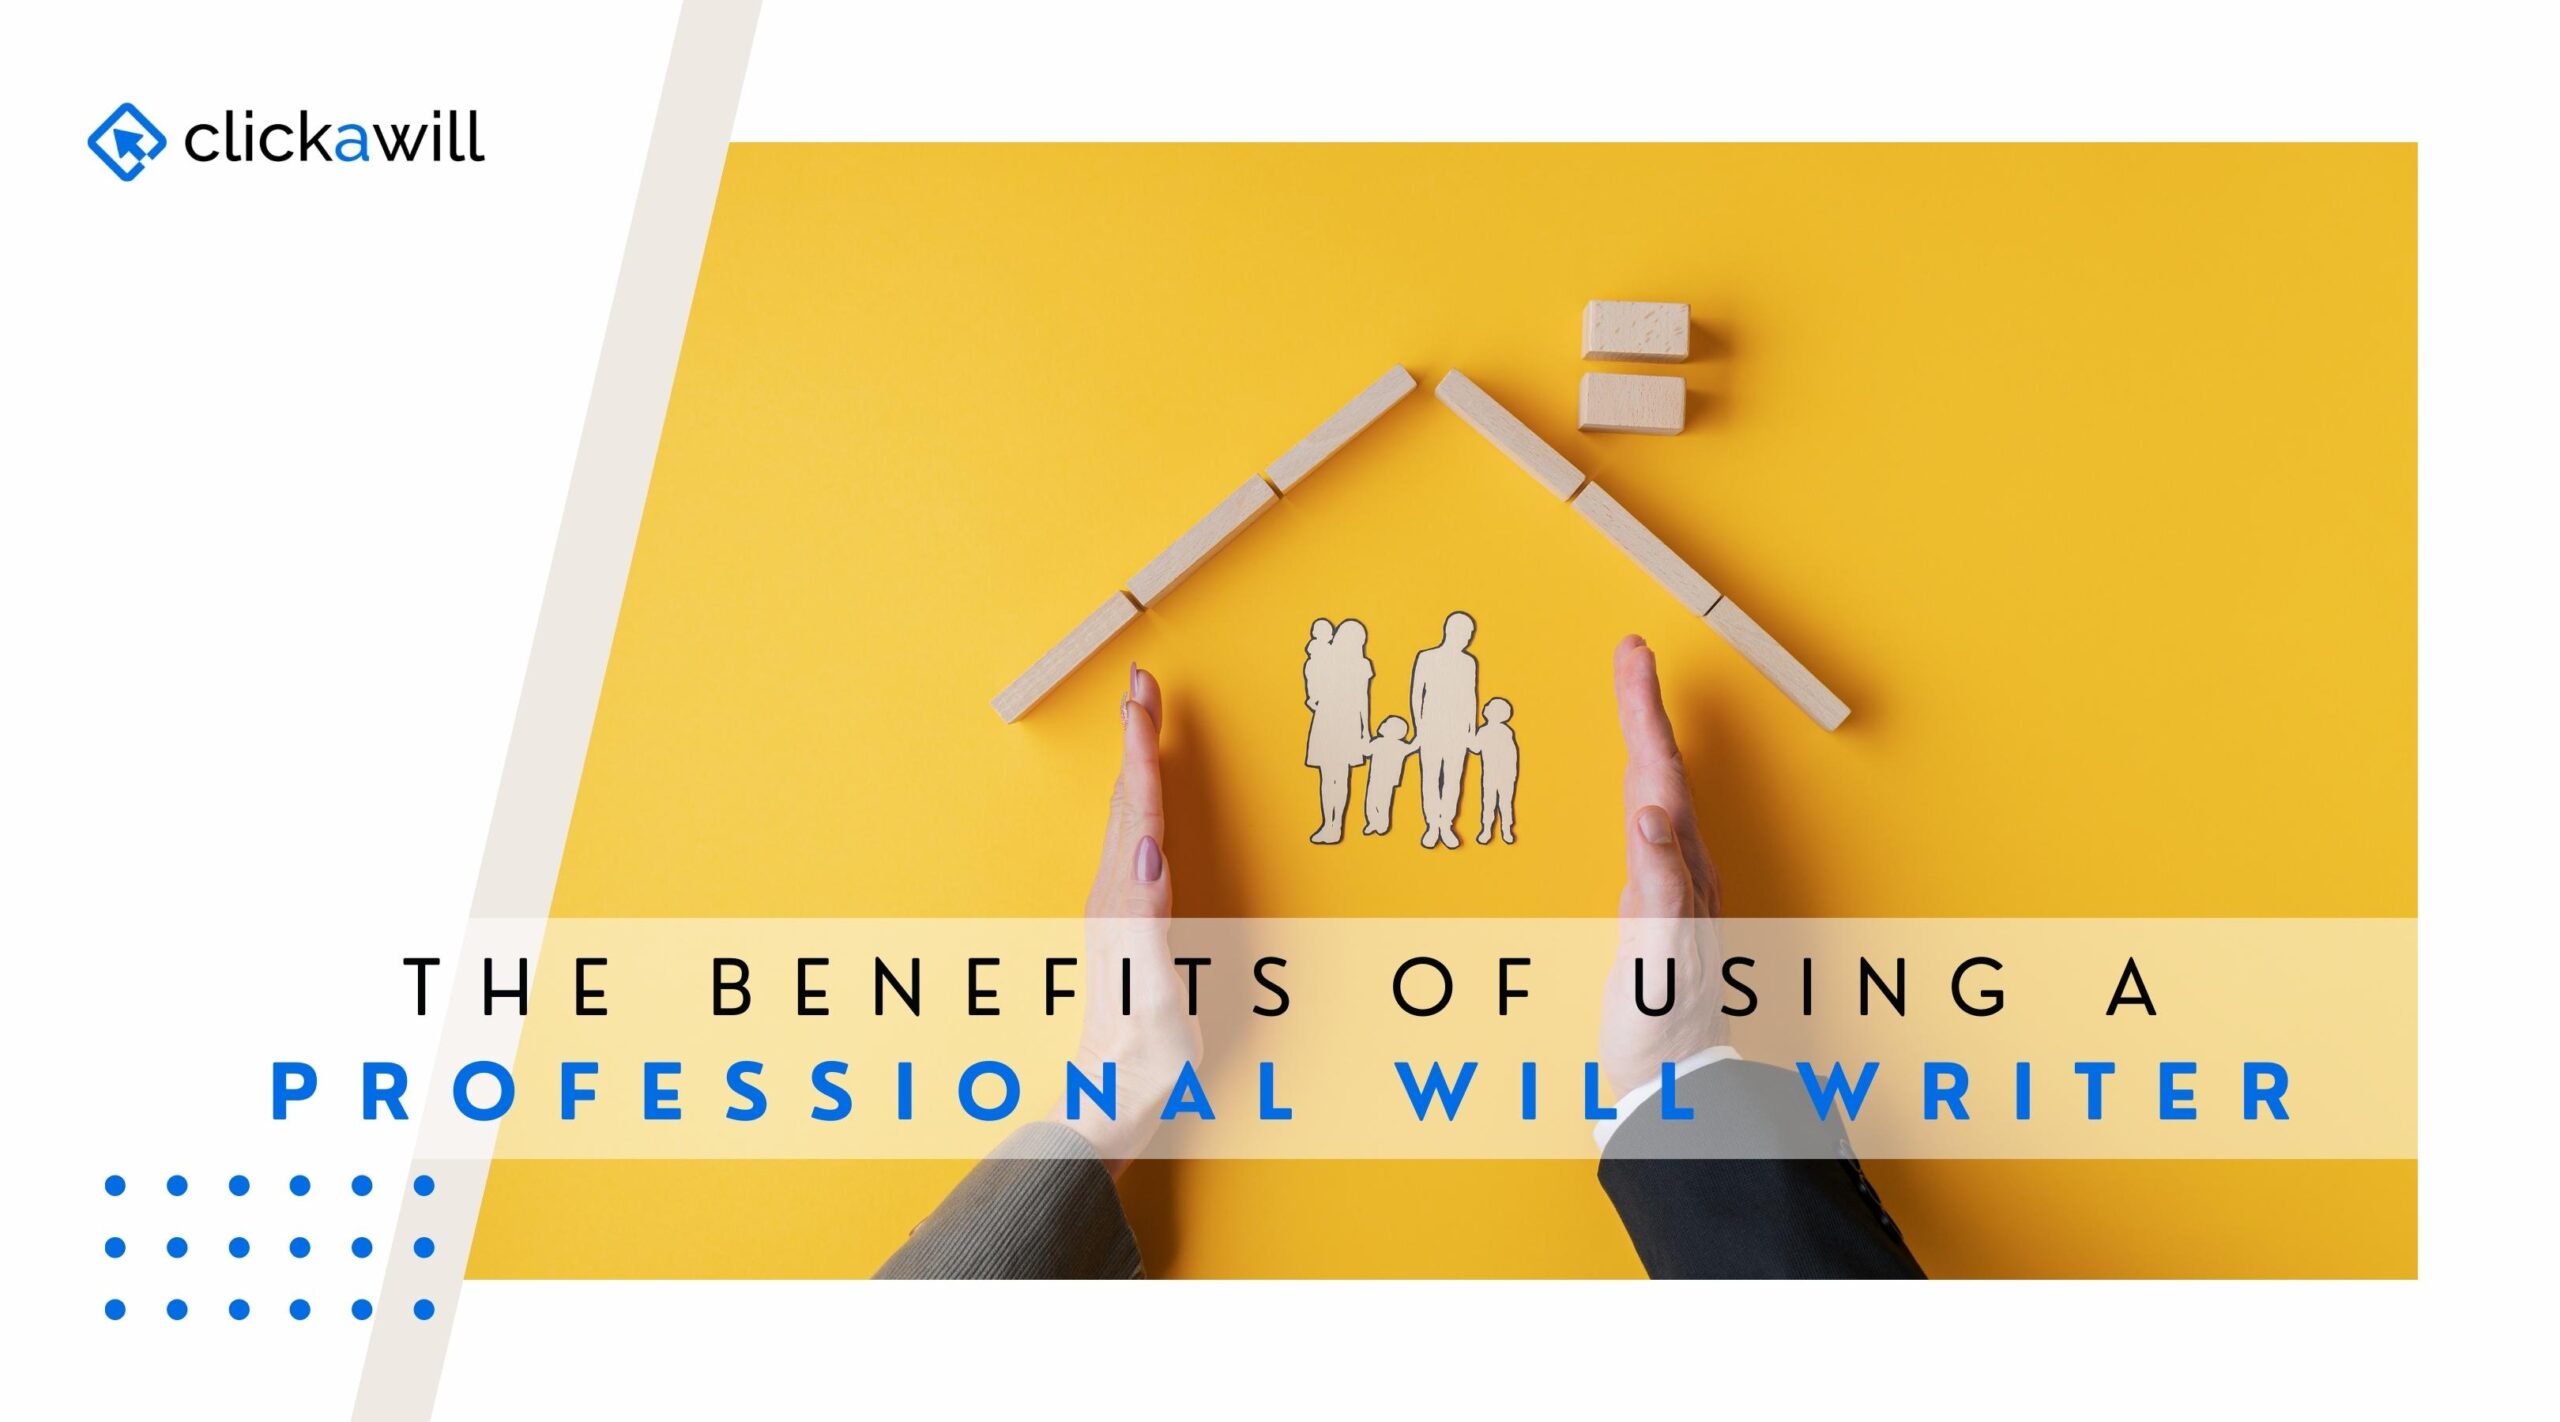 The Benefits of Using a Professional Will Writer